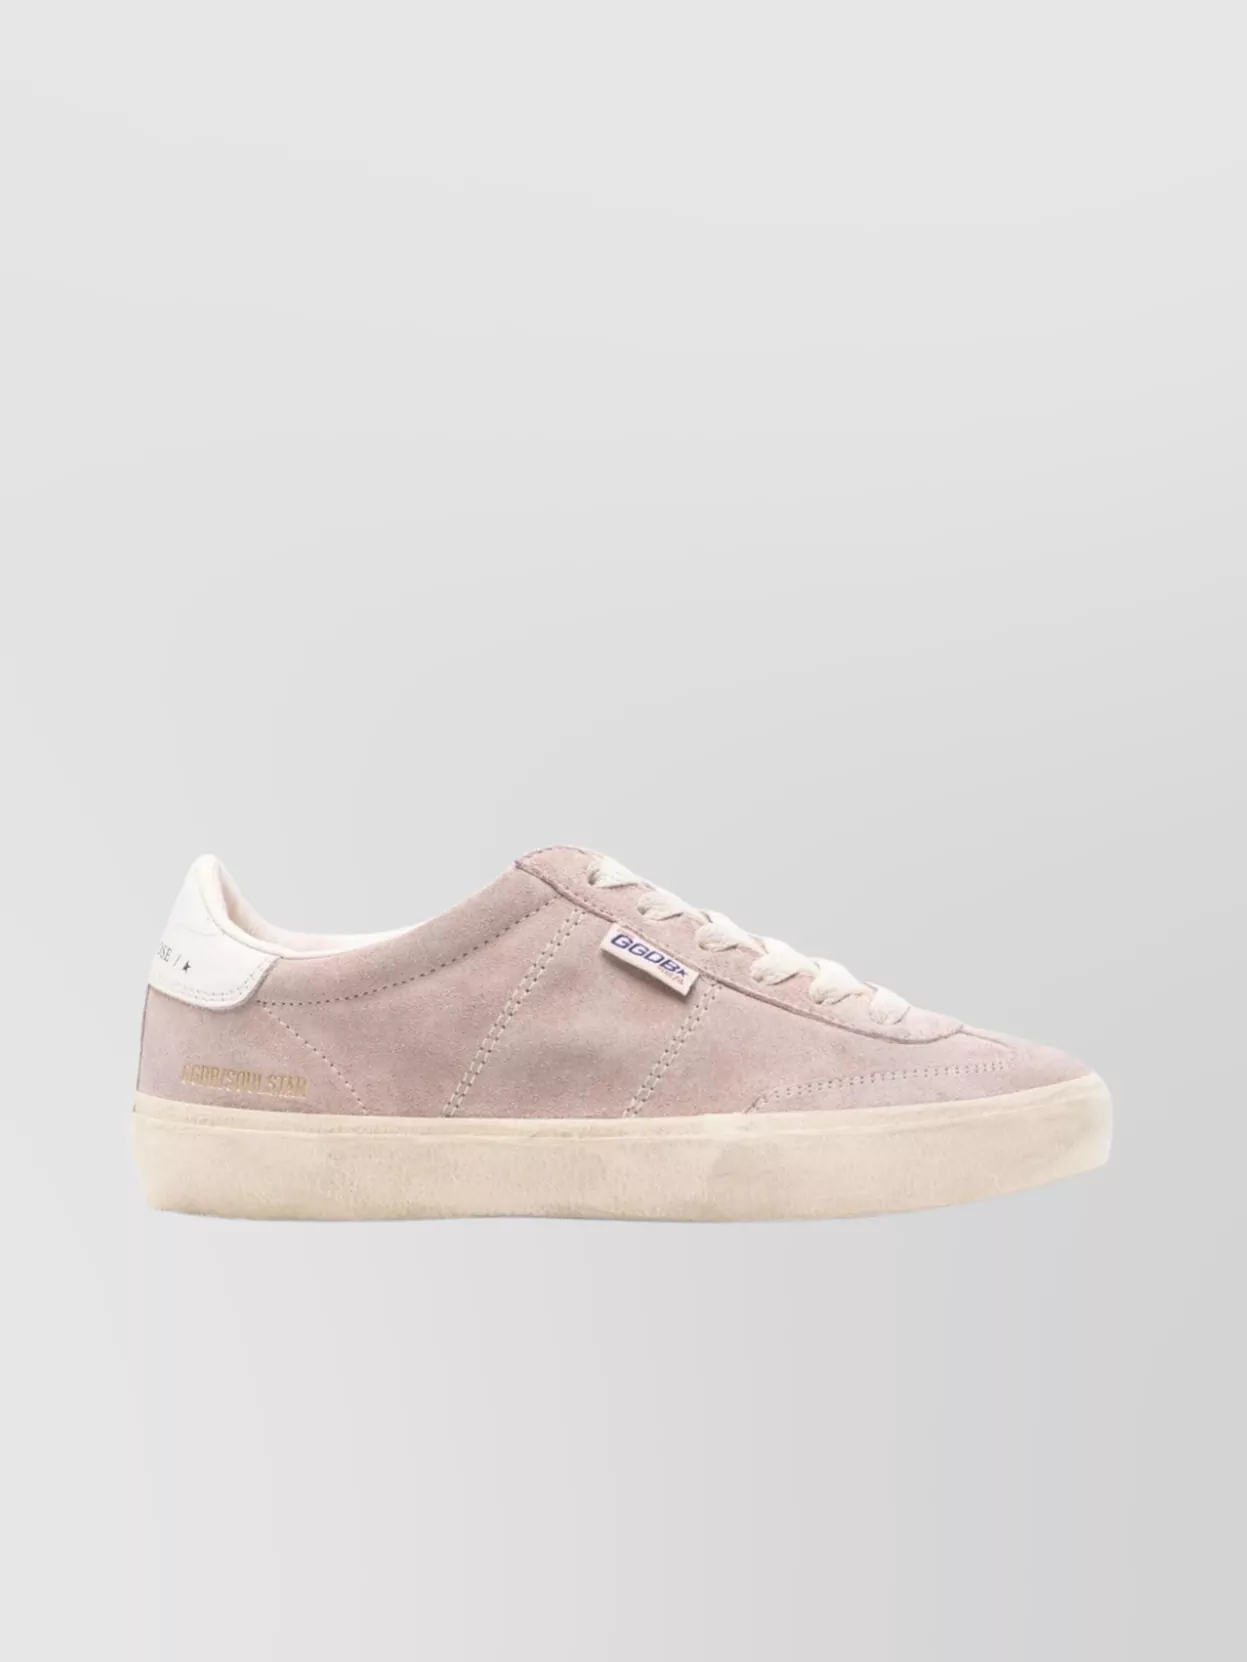 Shop Golden Goose Round Toe Flat Sole Sneakers